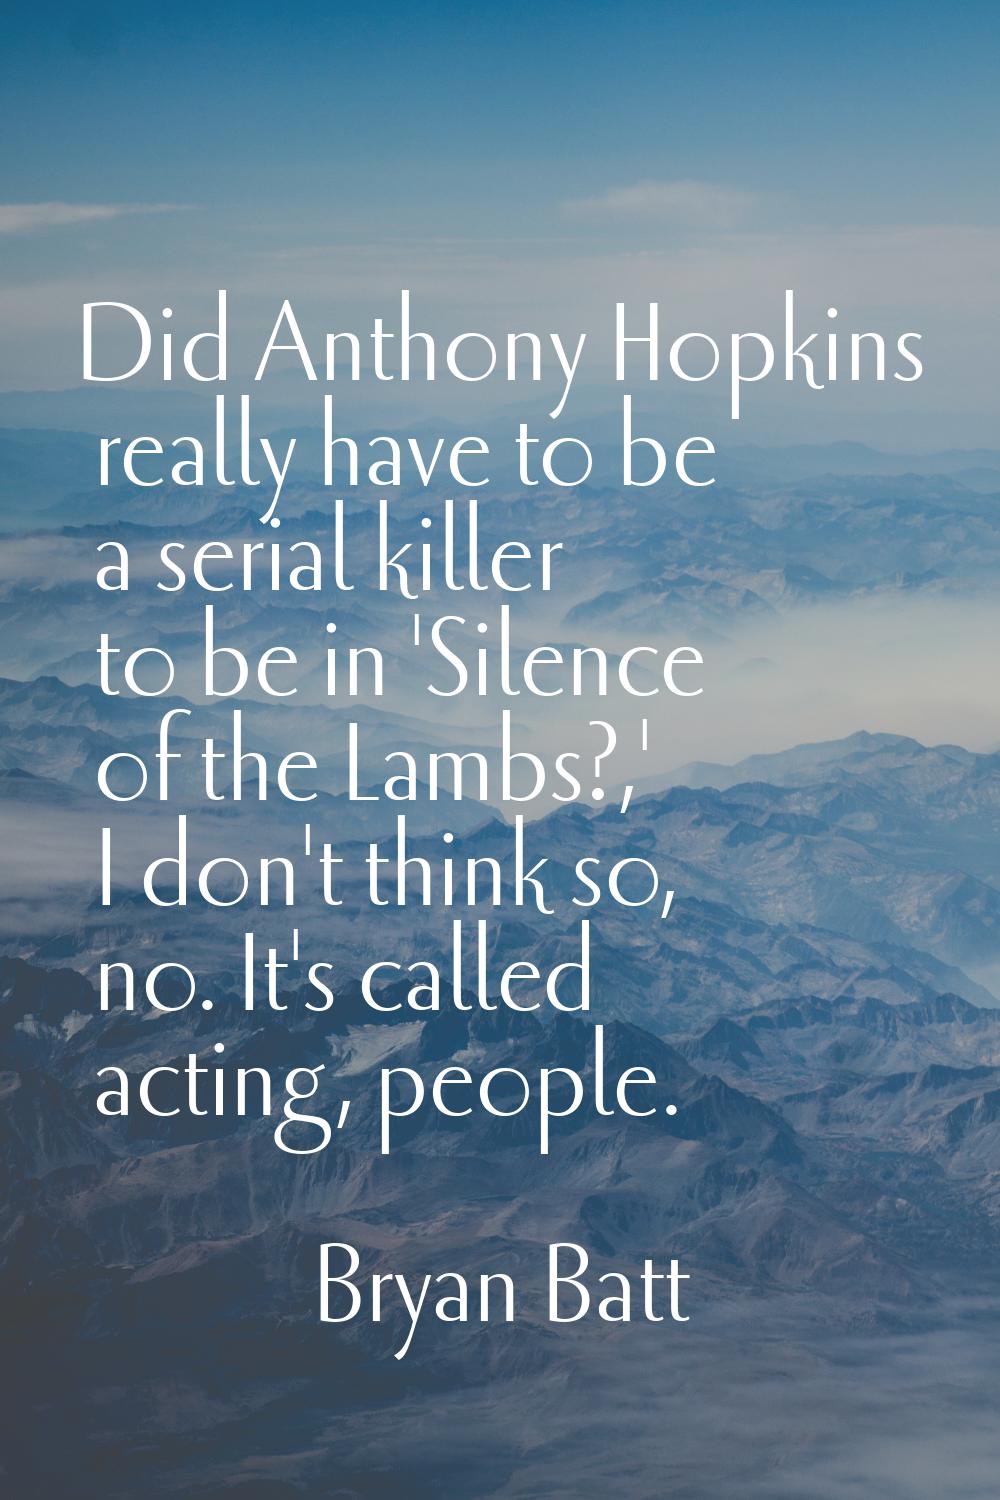 Did Anthony Hopkins really have to be a serial killer to be in 'Silence of the Lambs?,' I don't thi